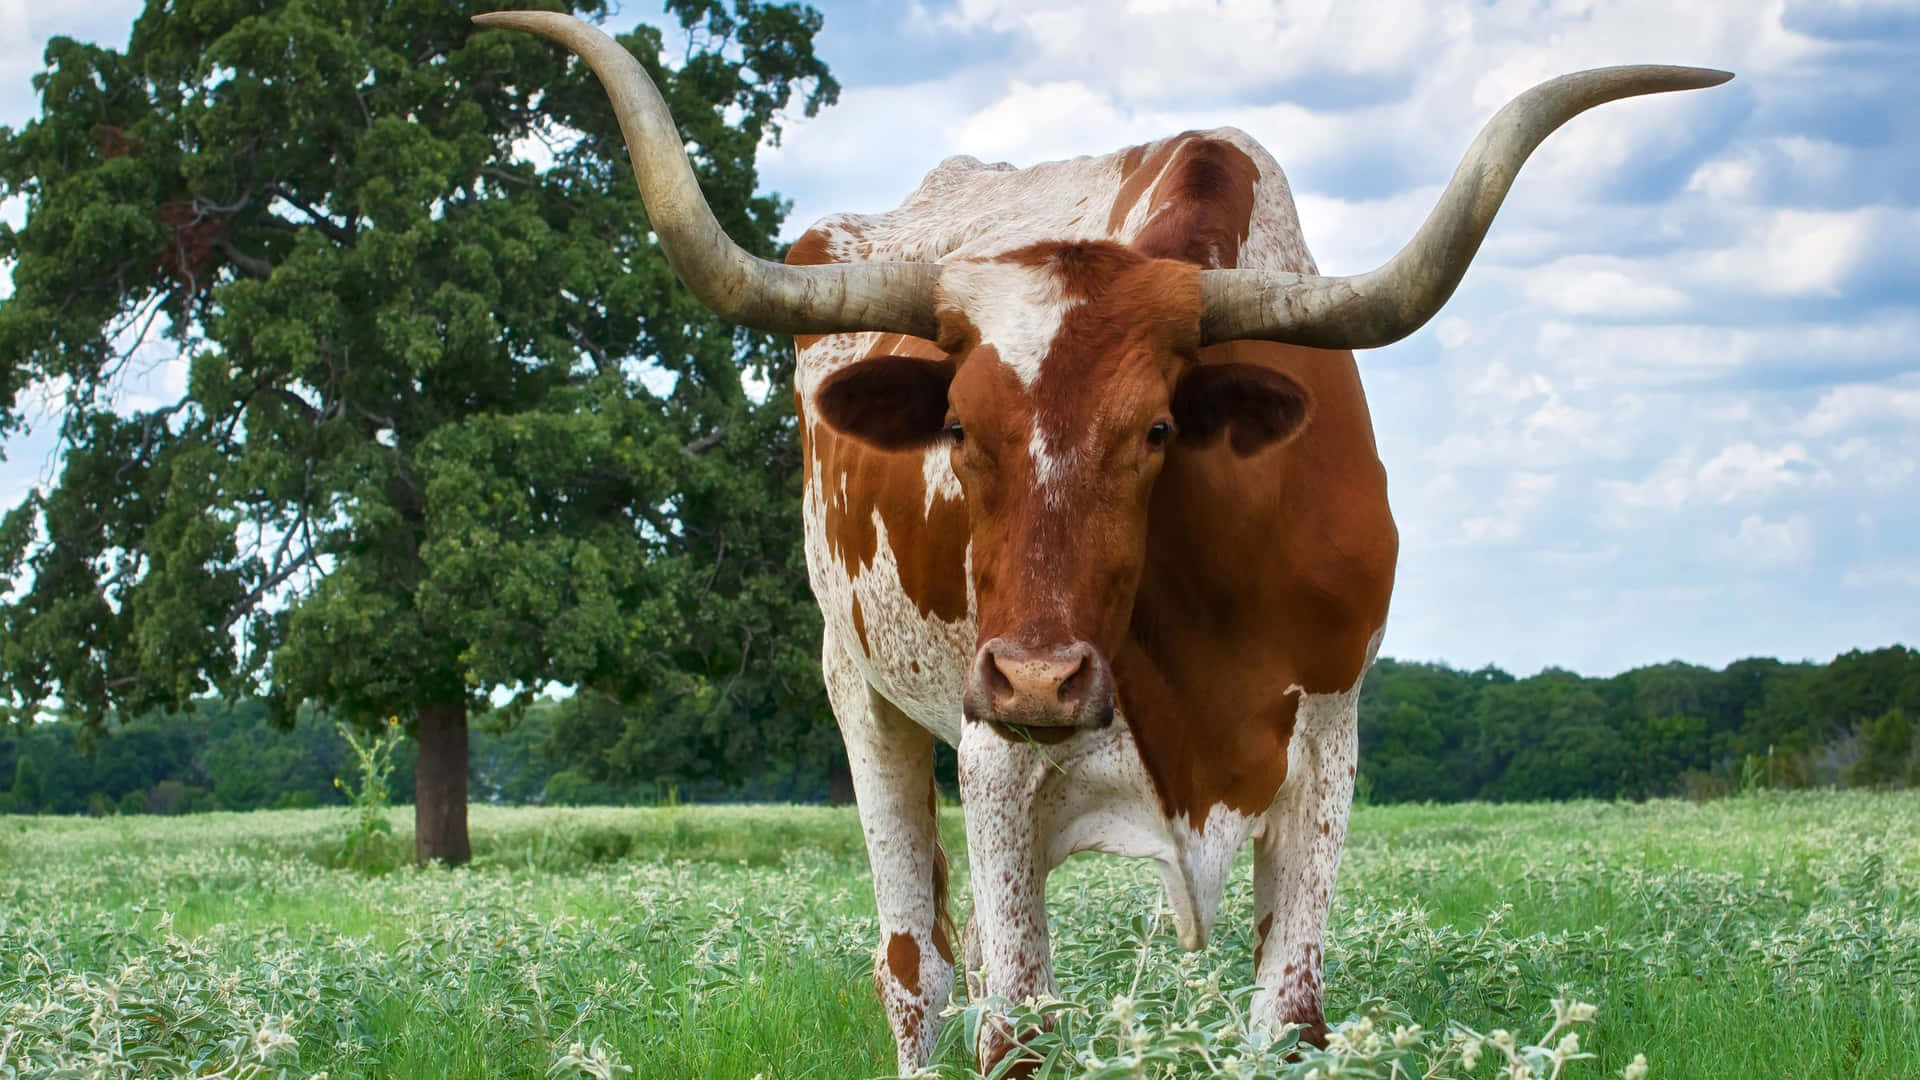 A Lone Star State of Mind – Welcome to Texas!